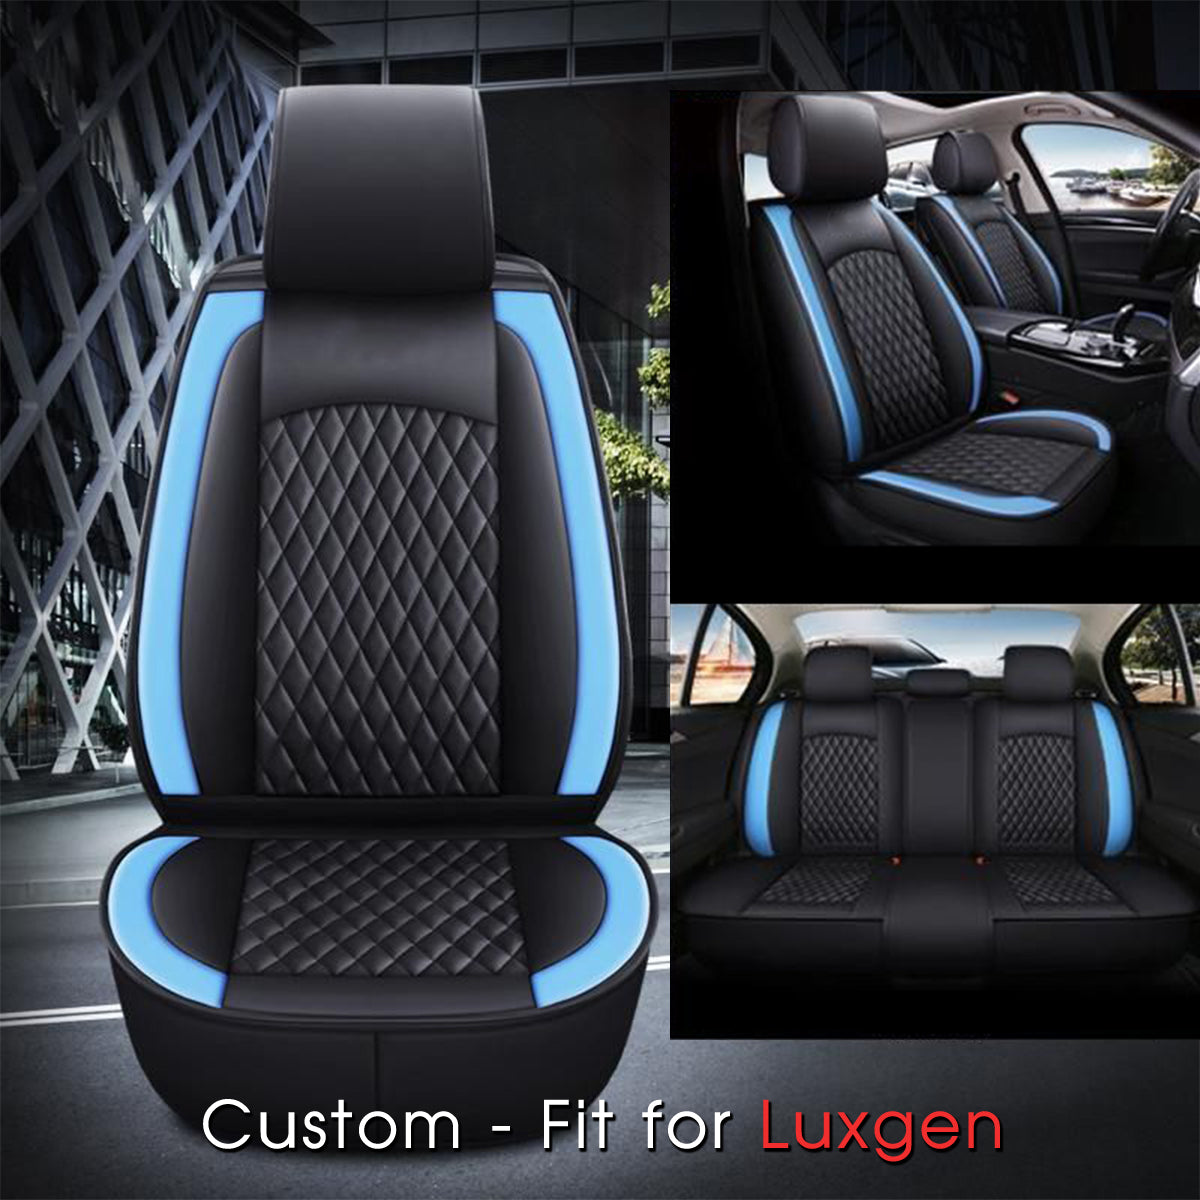 2 Car Seat Covers Full Set, Custom-Fit For Car, Waterproof Leather Front Rear Seat Automotive Protection Cushions, Car Accessories DLLE211